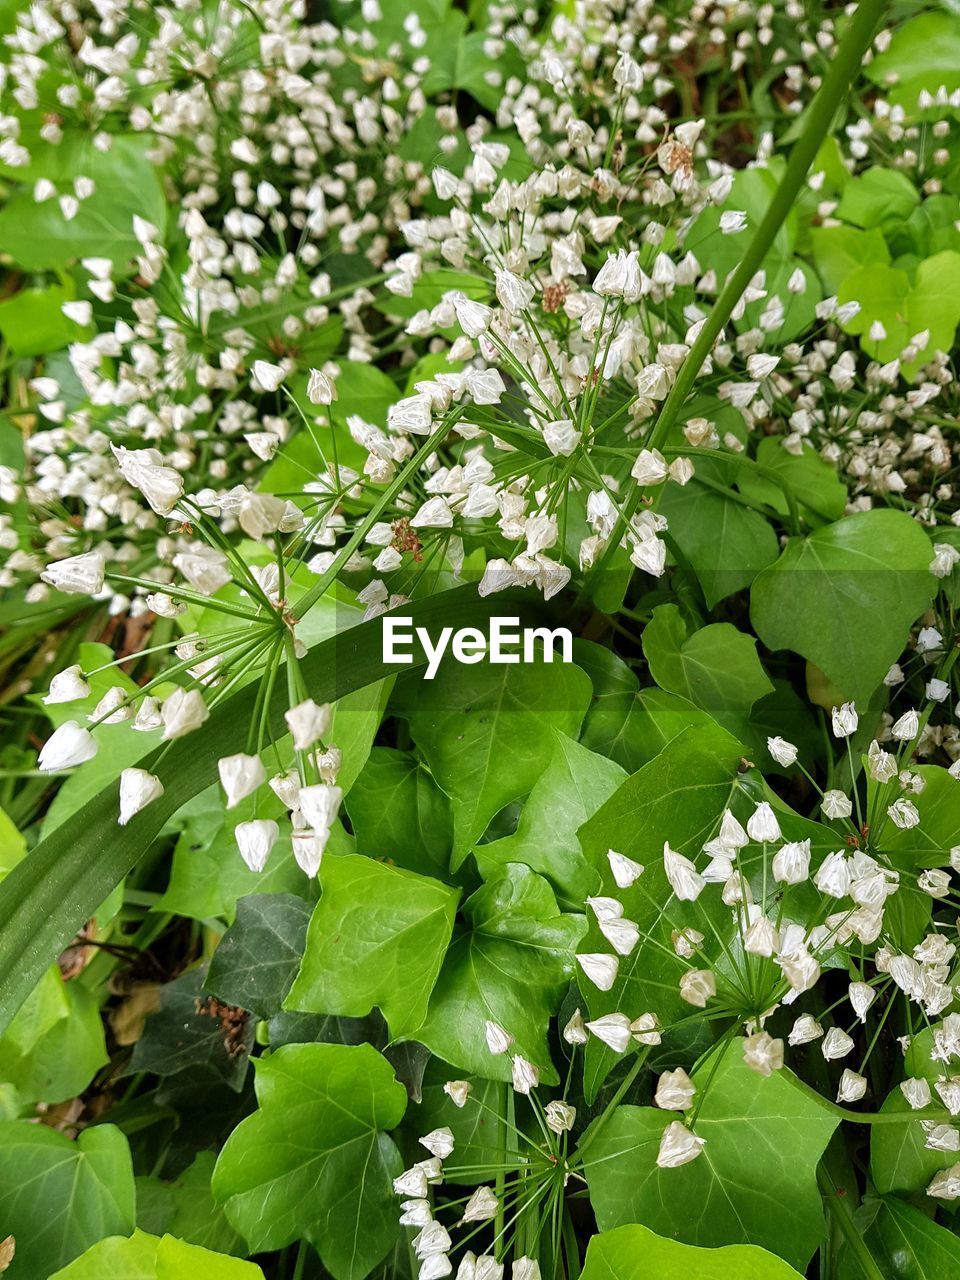 CLOSE-UP OF WHITE FLOWERING PLANT WITH LEAVES